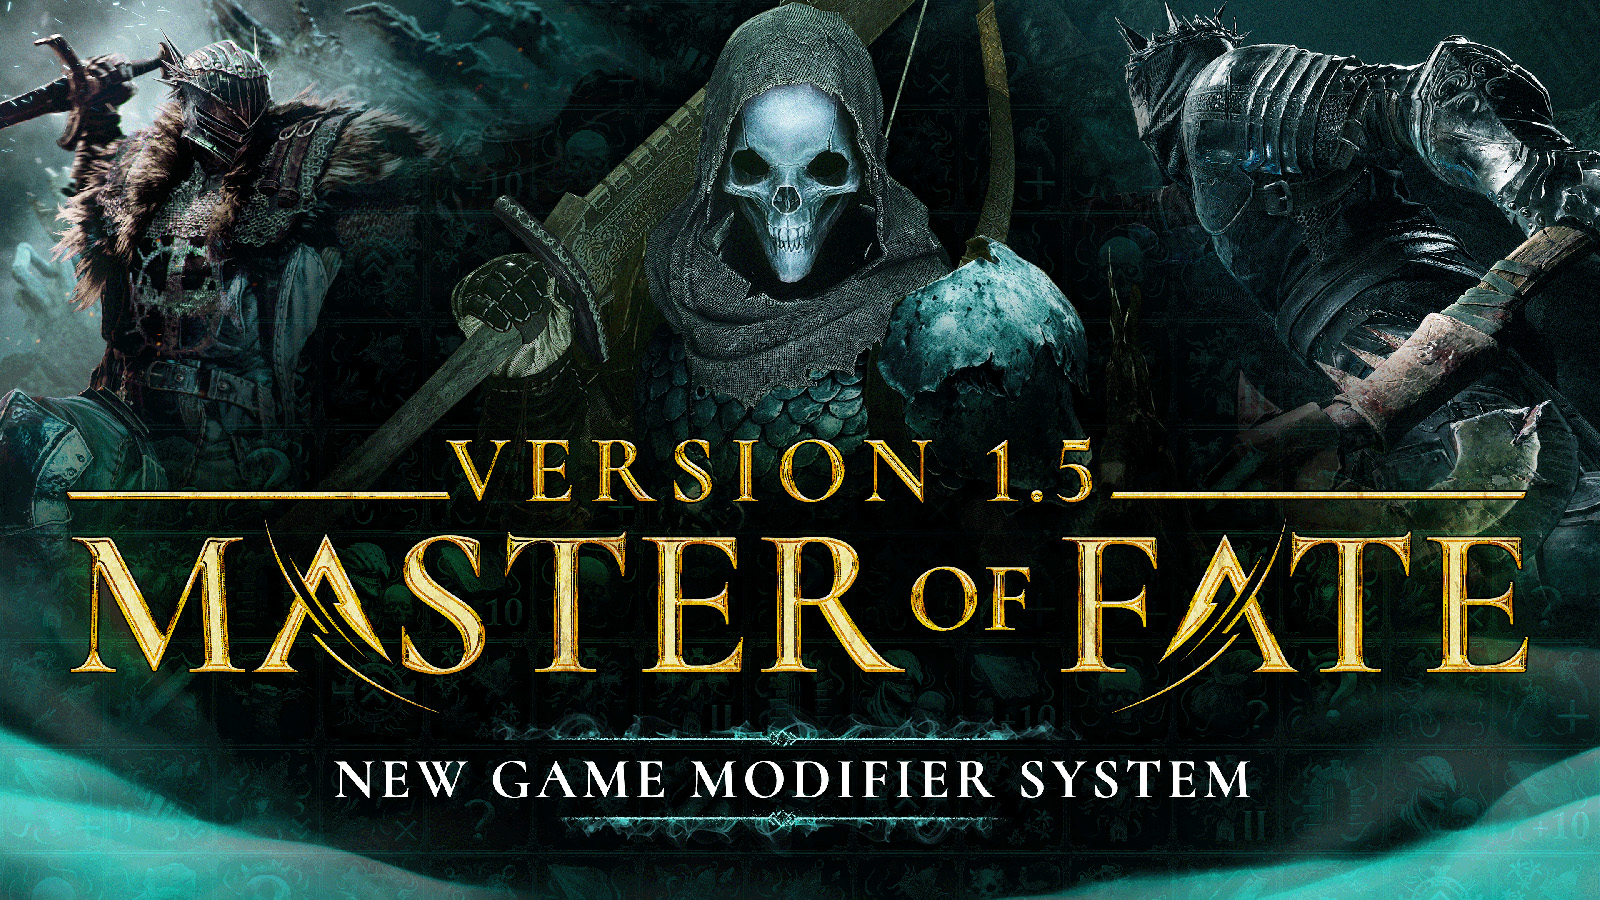 Lords Of The Fallen’s Final Content Update ‘Master Of Fate’ Adds A Game Modifier System